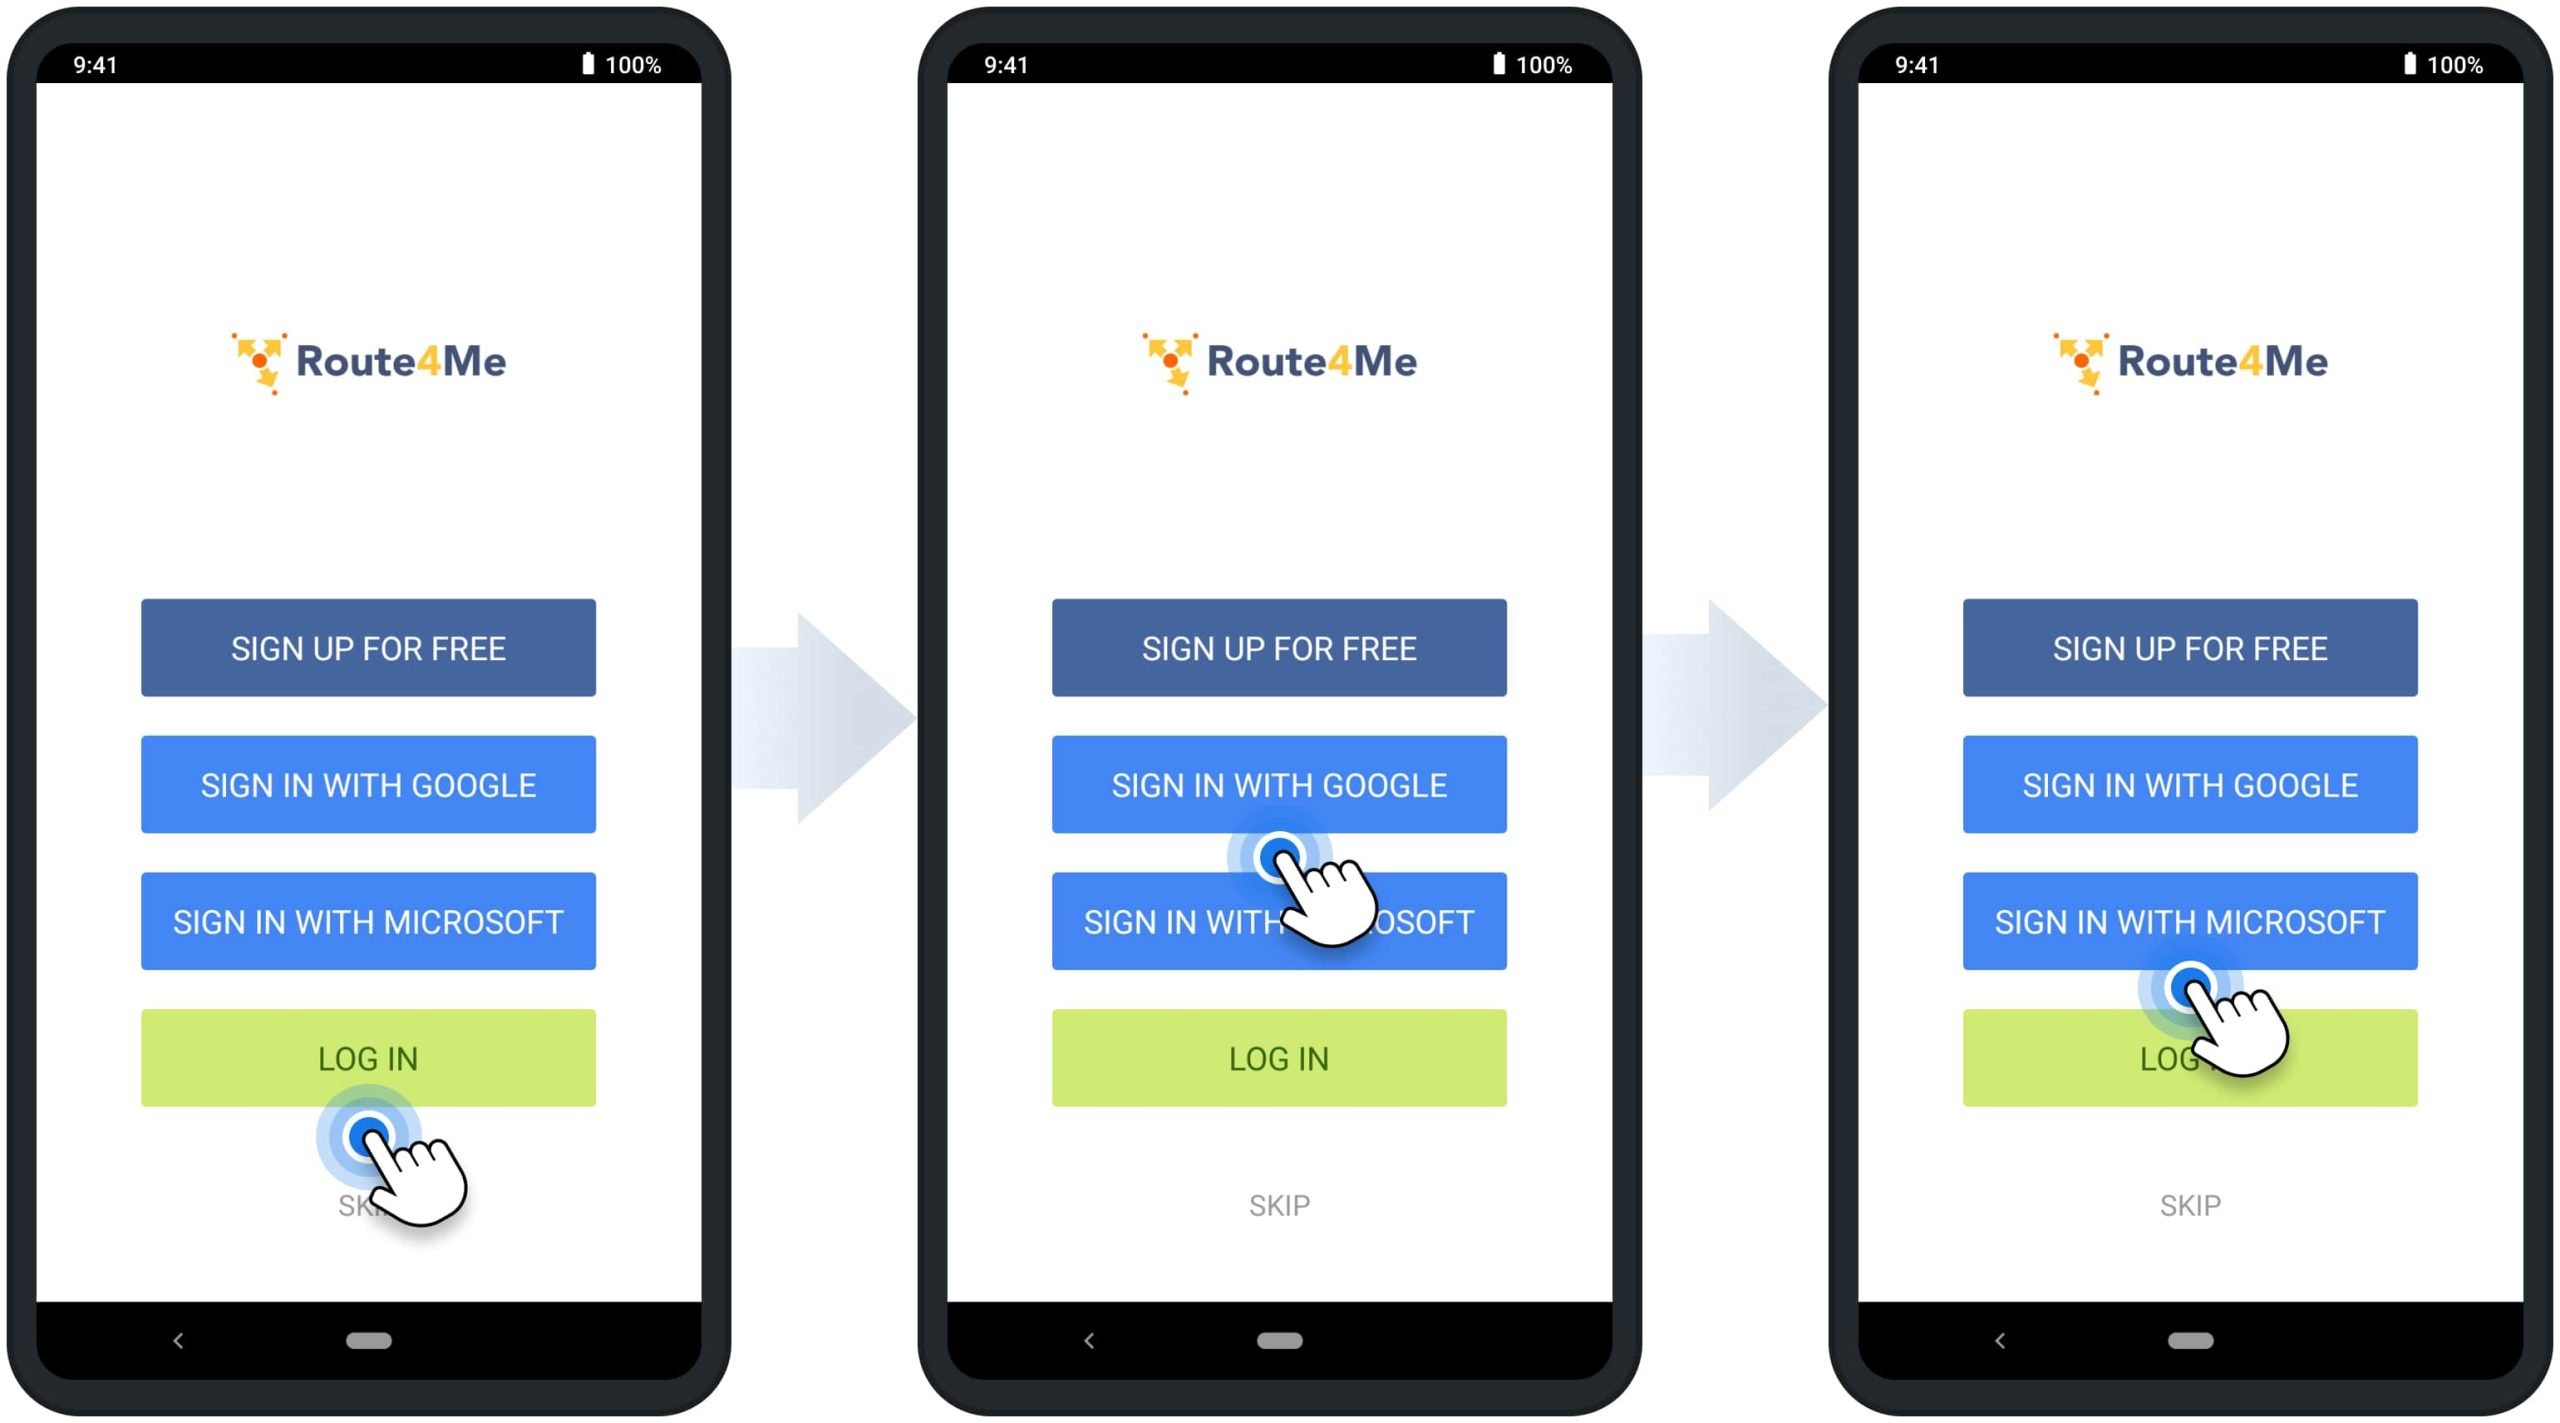 Using Google SSO and Microsoft to sign into Route4Me's Android Route Planner app.